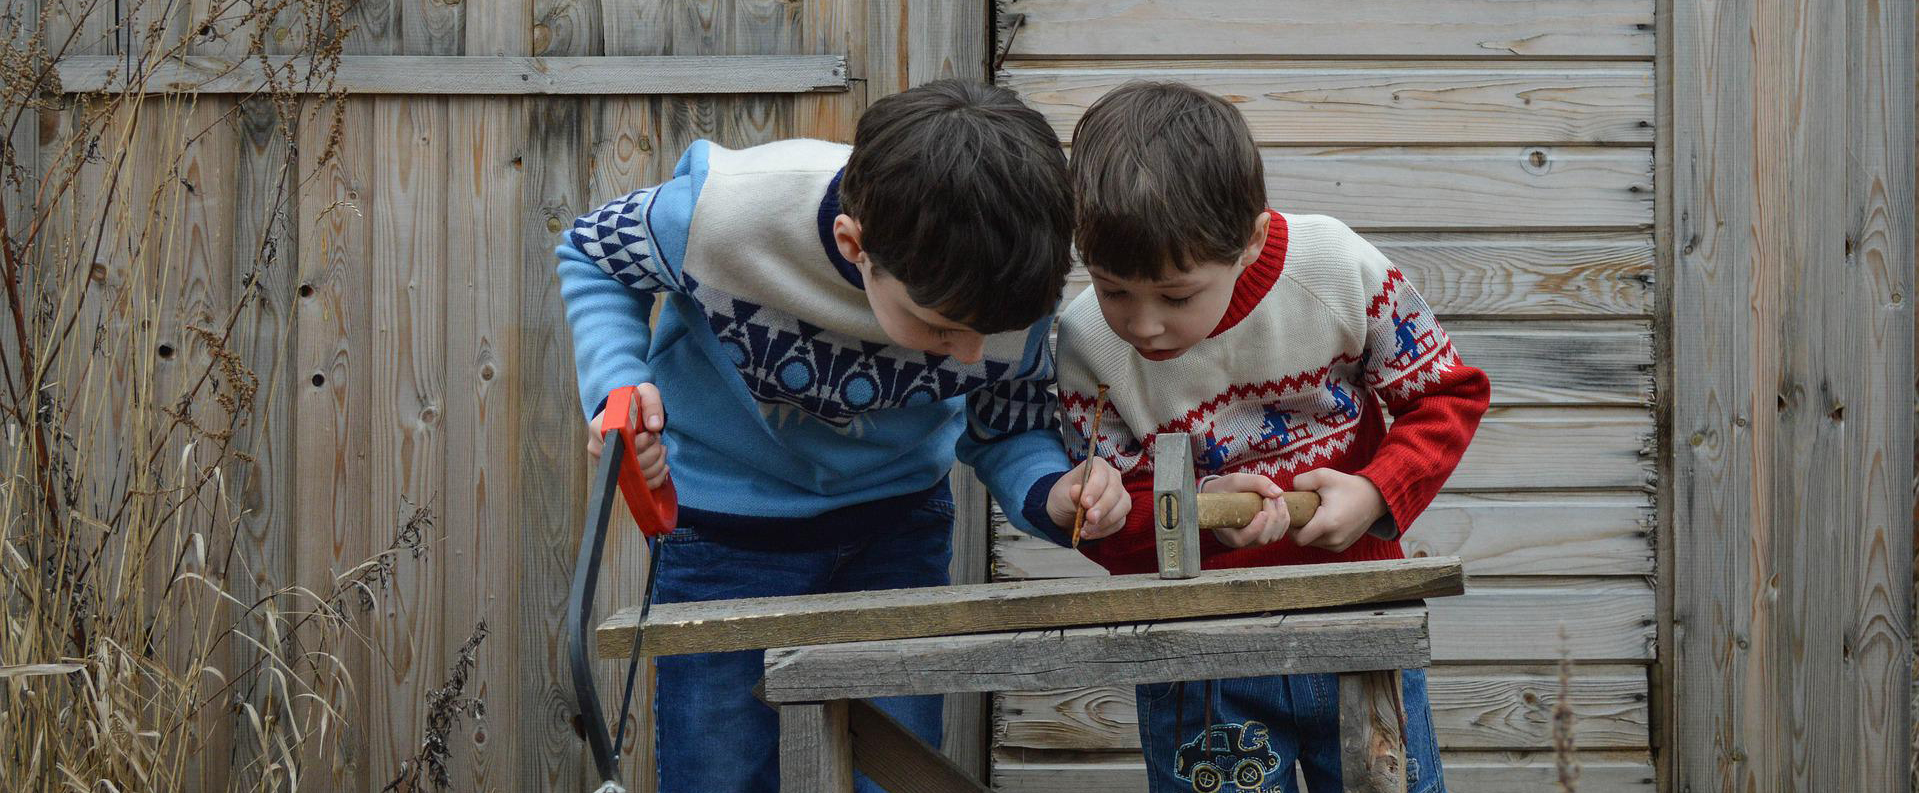 Kids building with wood